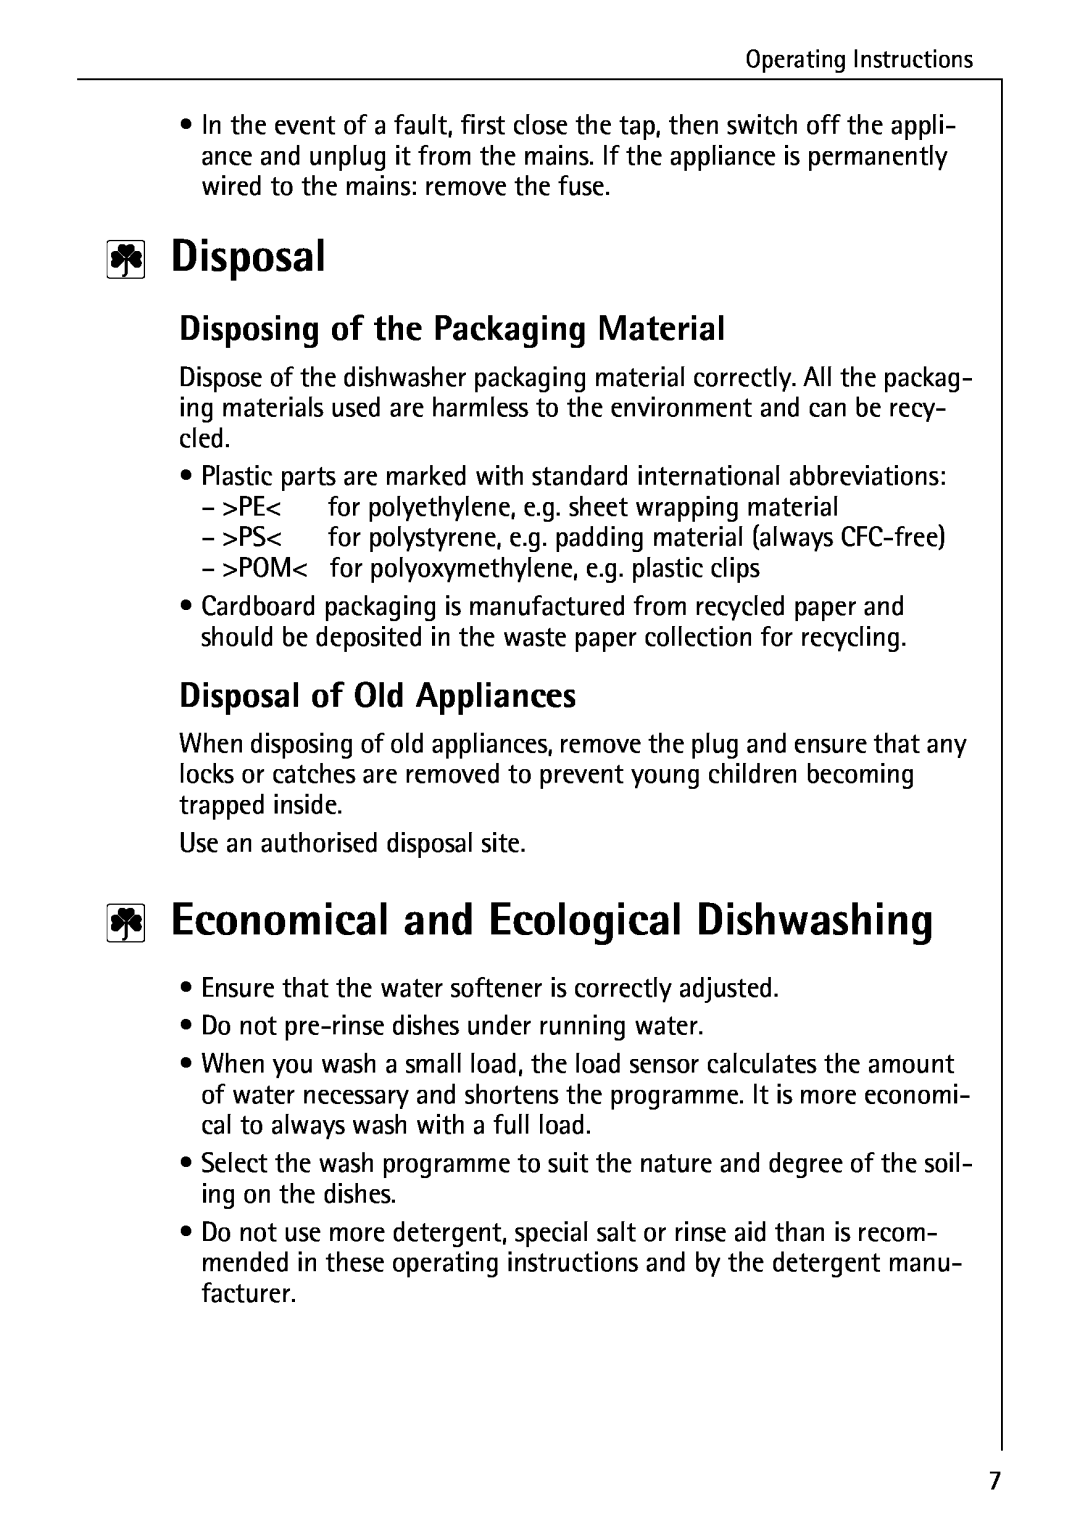 Electrolux 85050 VI manual Disposal, Economical and Ecological Dishwashing, Disposing of the Packaging Material 